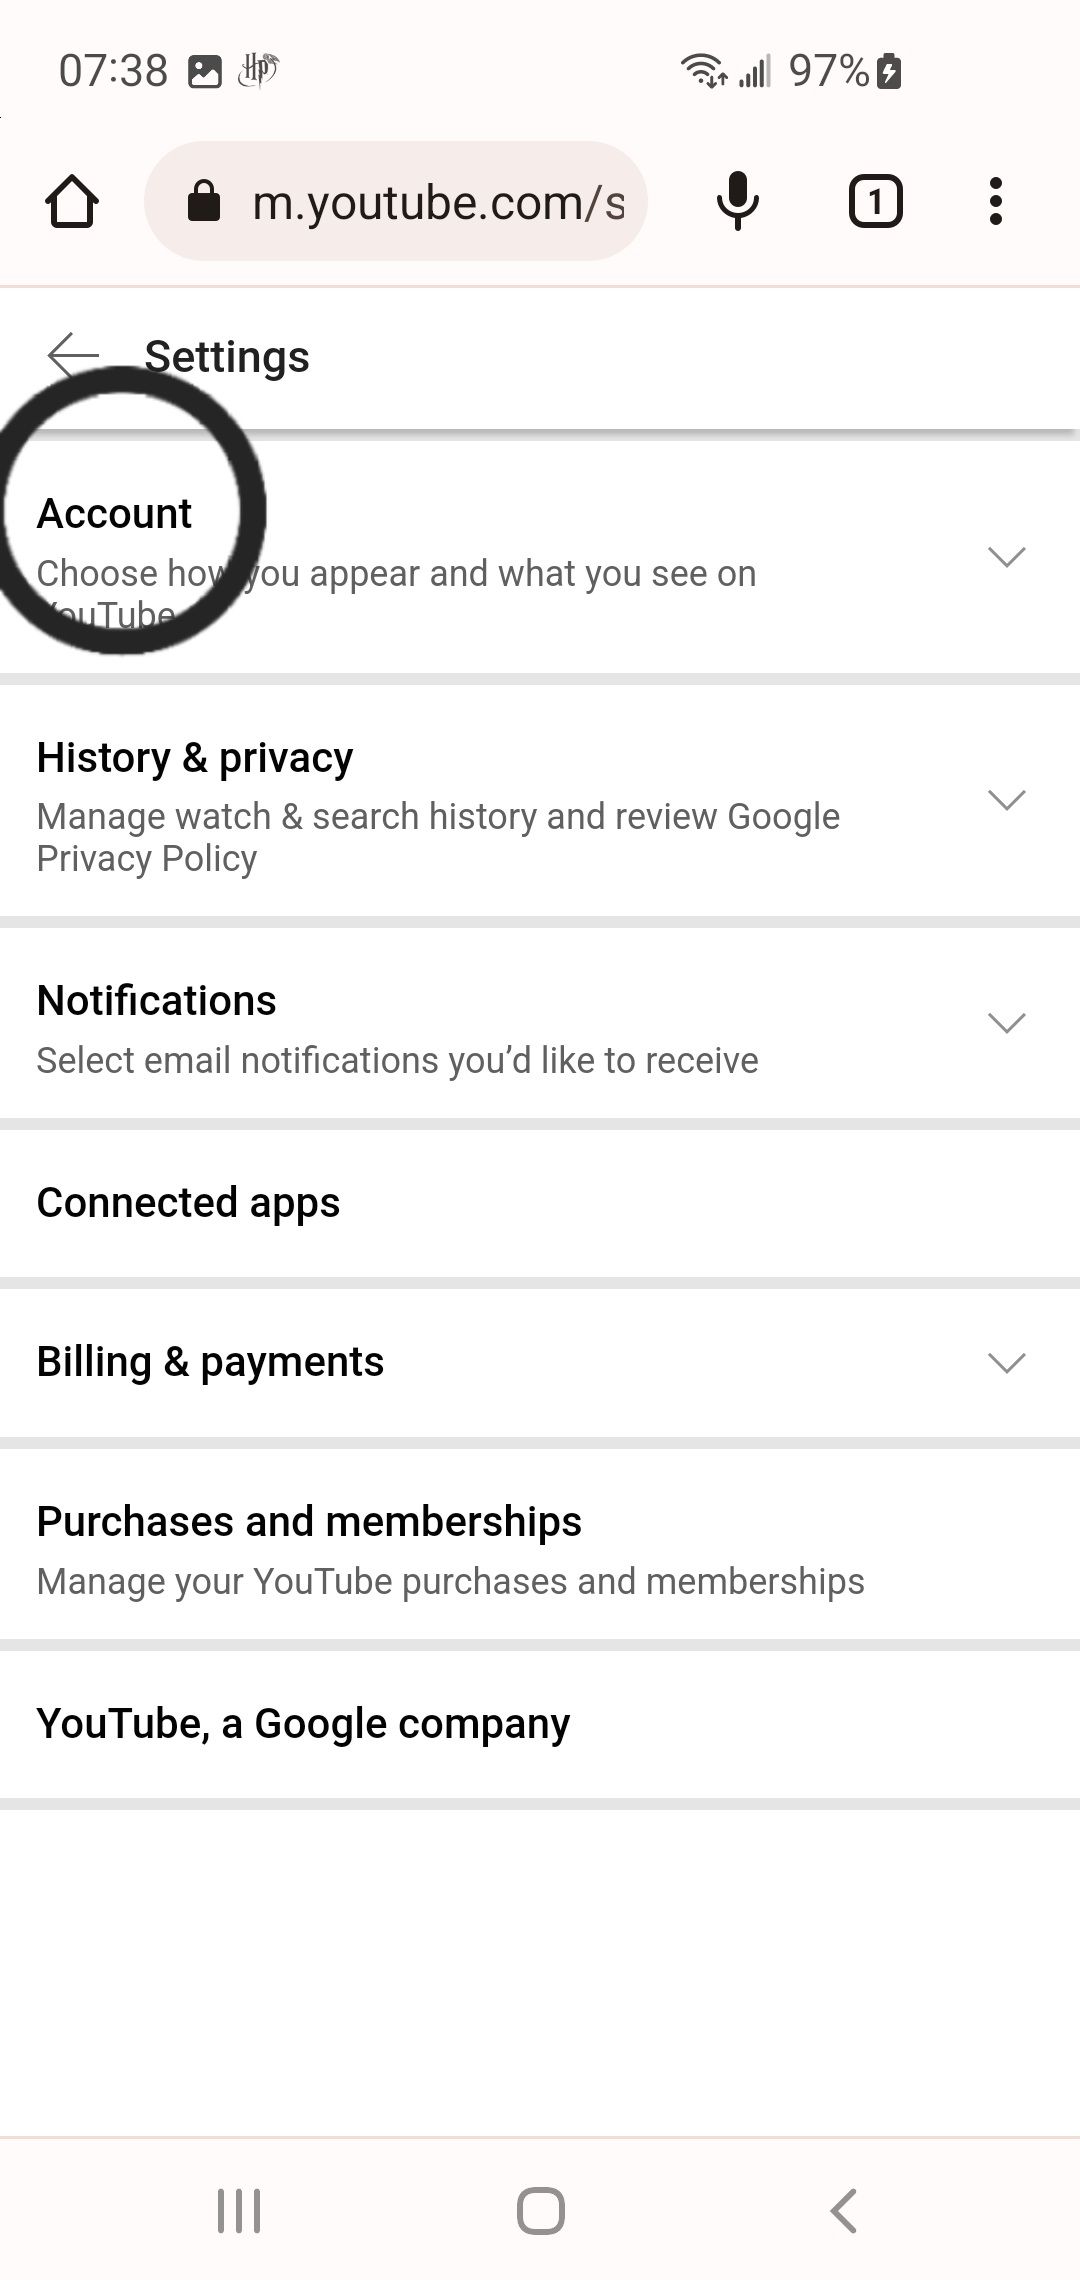 In the YouTube app, go to Settings and select Account